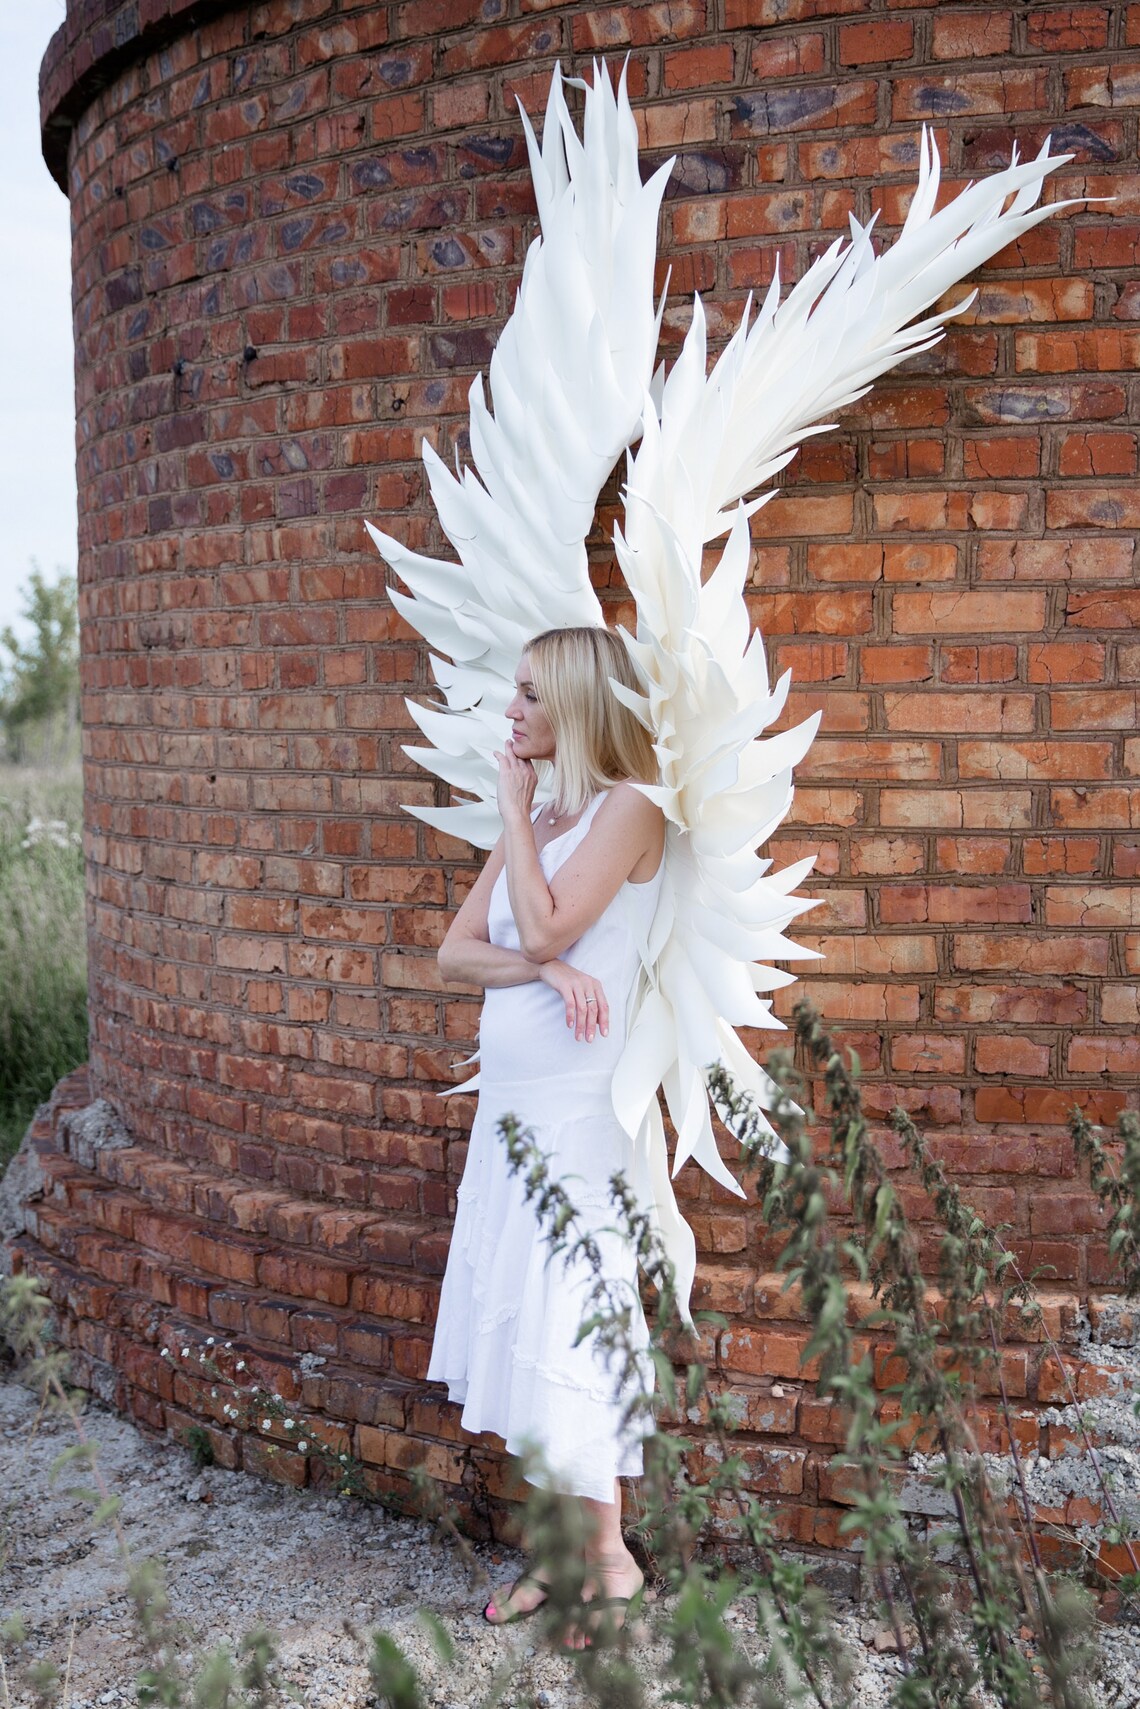 White Angel Wings Costume Fairy Wings Adult Photoshoot Etsy